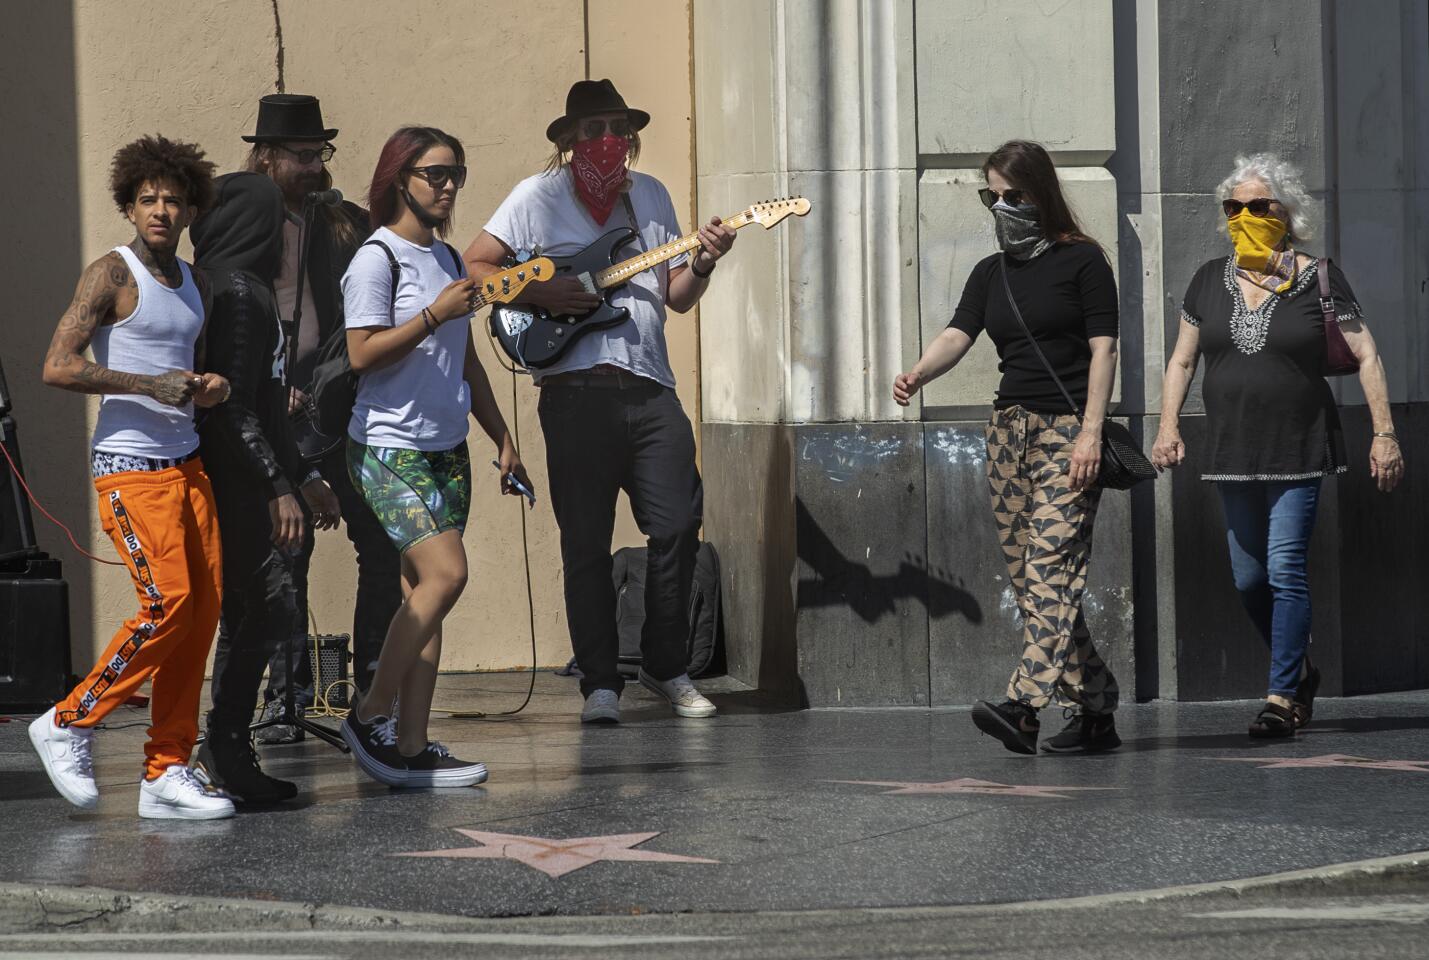 Pedestrians, some with face coverings, some without, walk past musicians at Hollywood Boulevard and Highland Avenue.